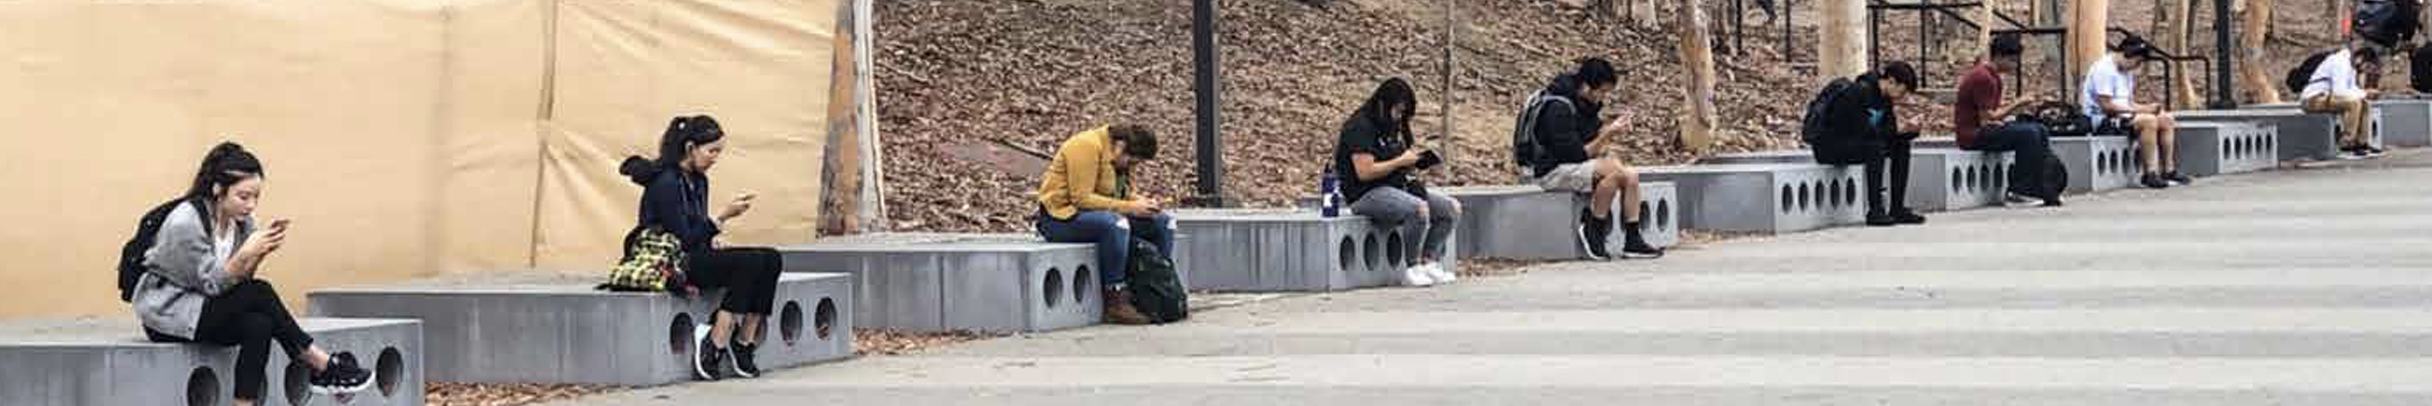 Isolated students on cellphones